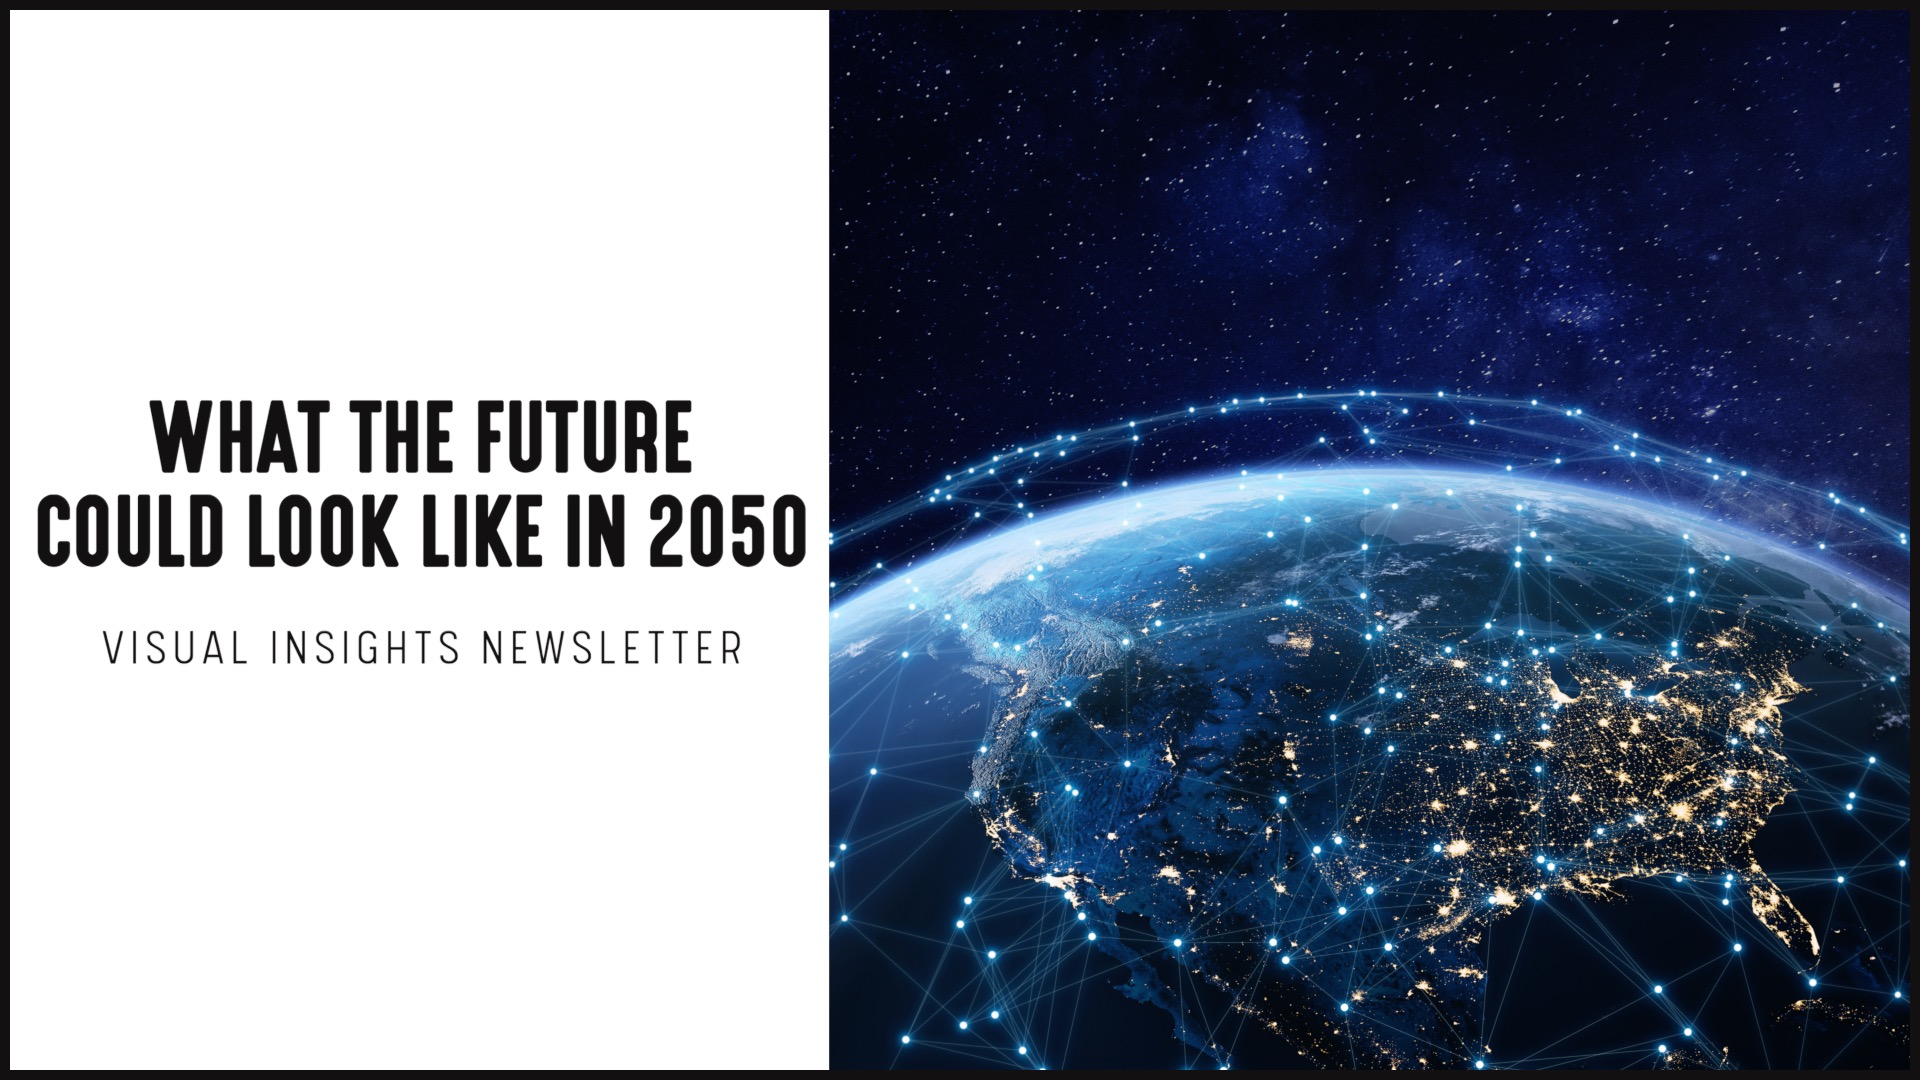 [NEW] Visual Insights Newsletter | What Will the Future Look Like?